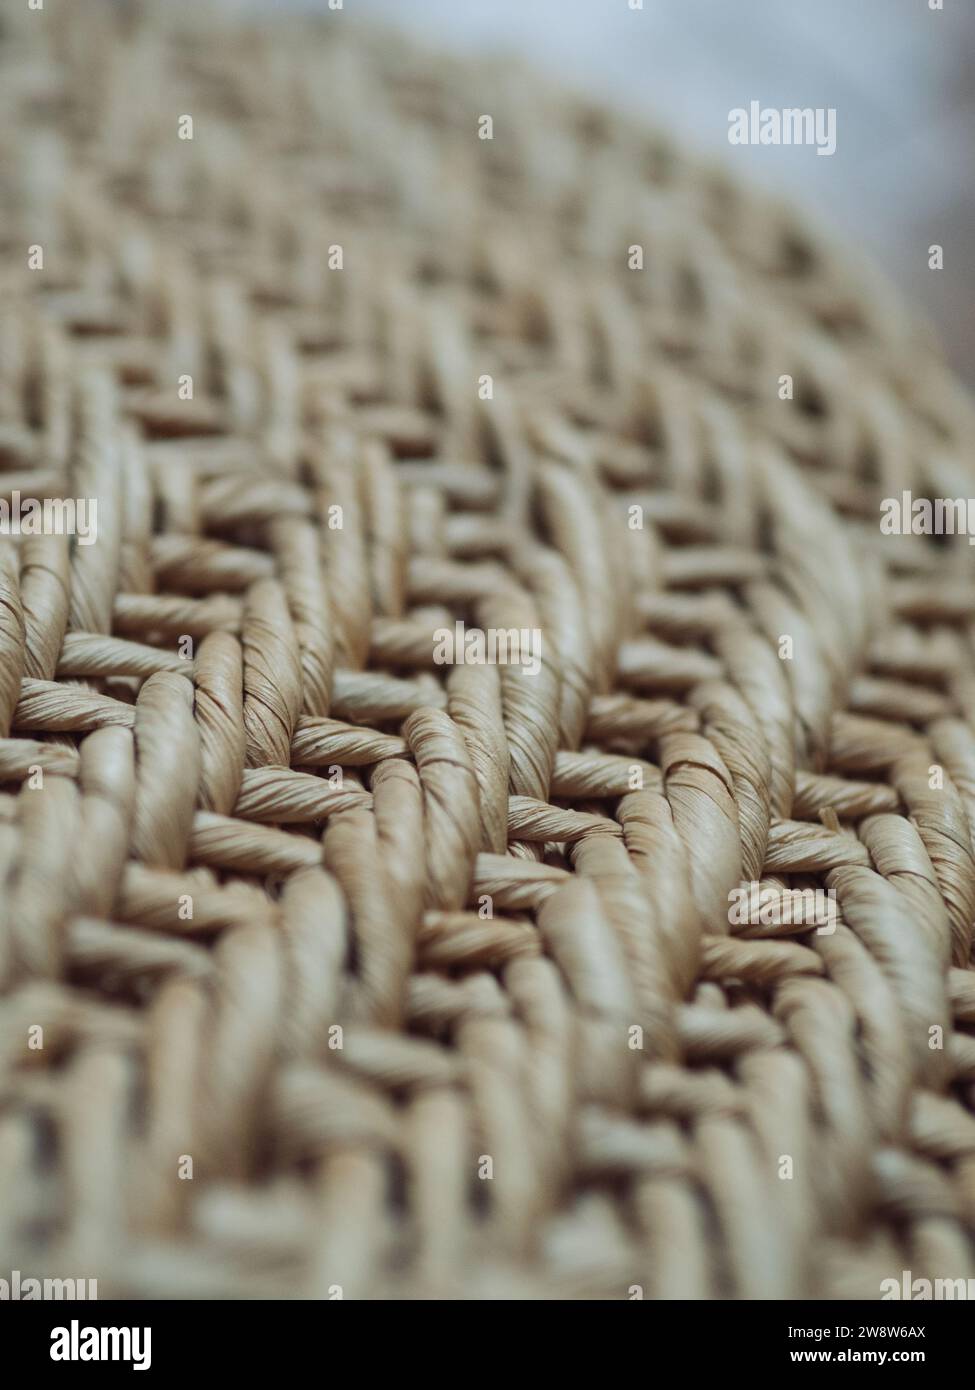 Vertical close up image of a straw shoulder beach bag detail. Stock Photo